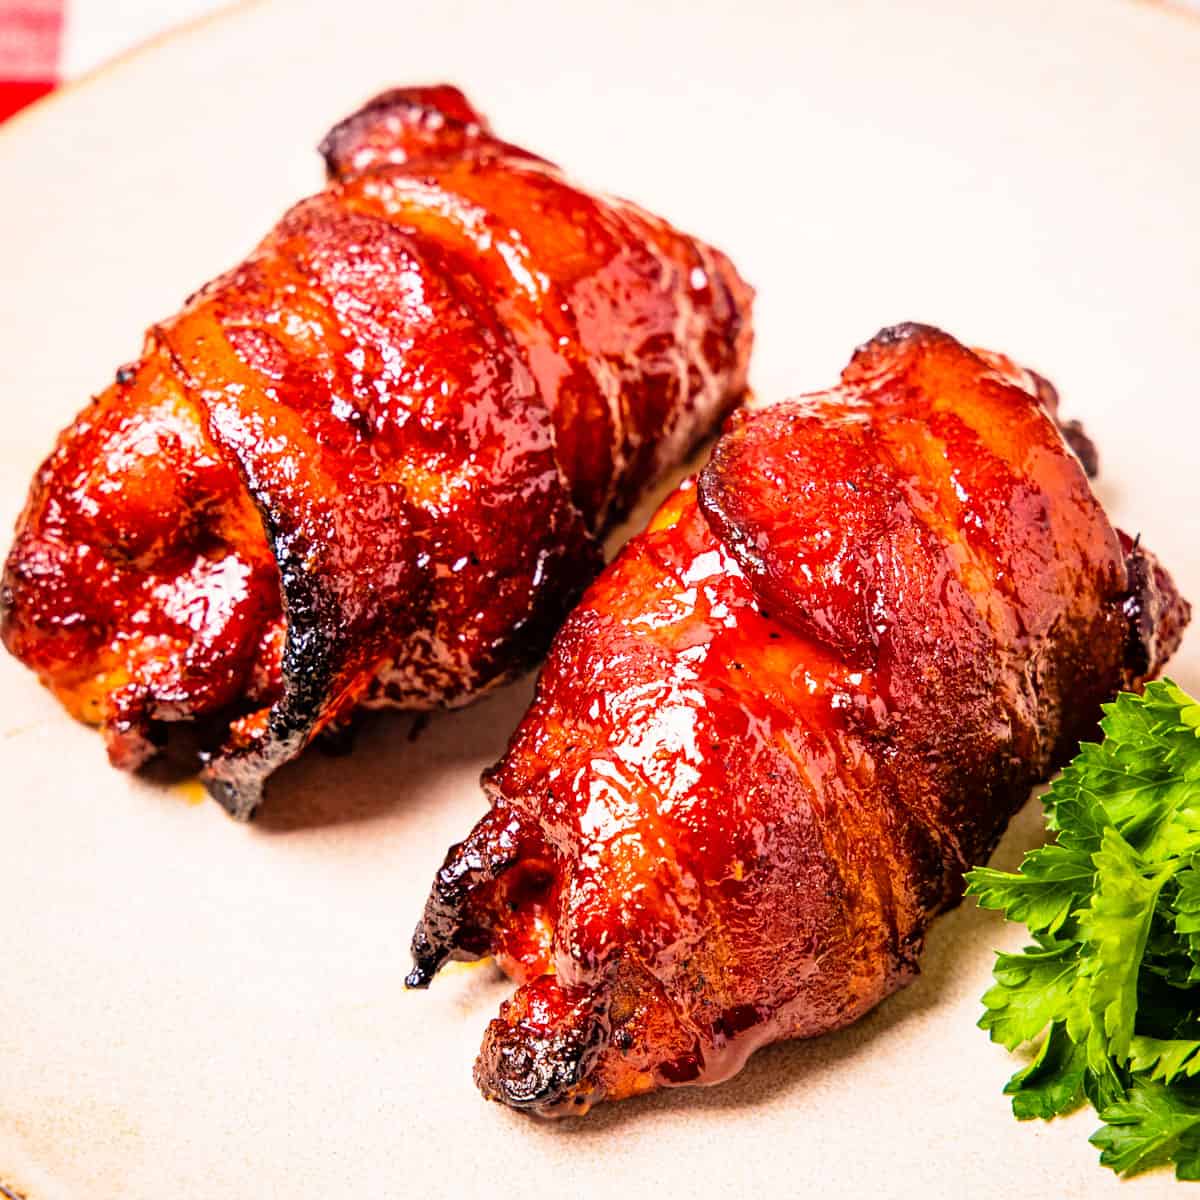 Smoked chicken thighs wrapped in bacon, shown served on a plate.